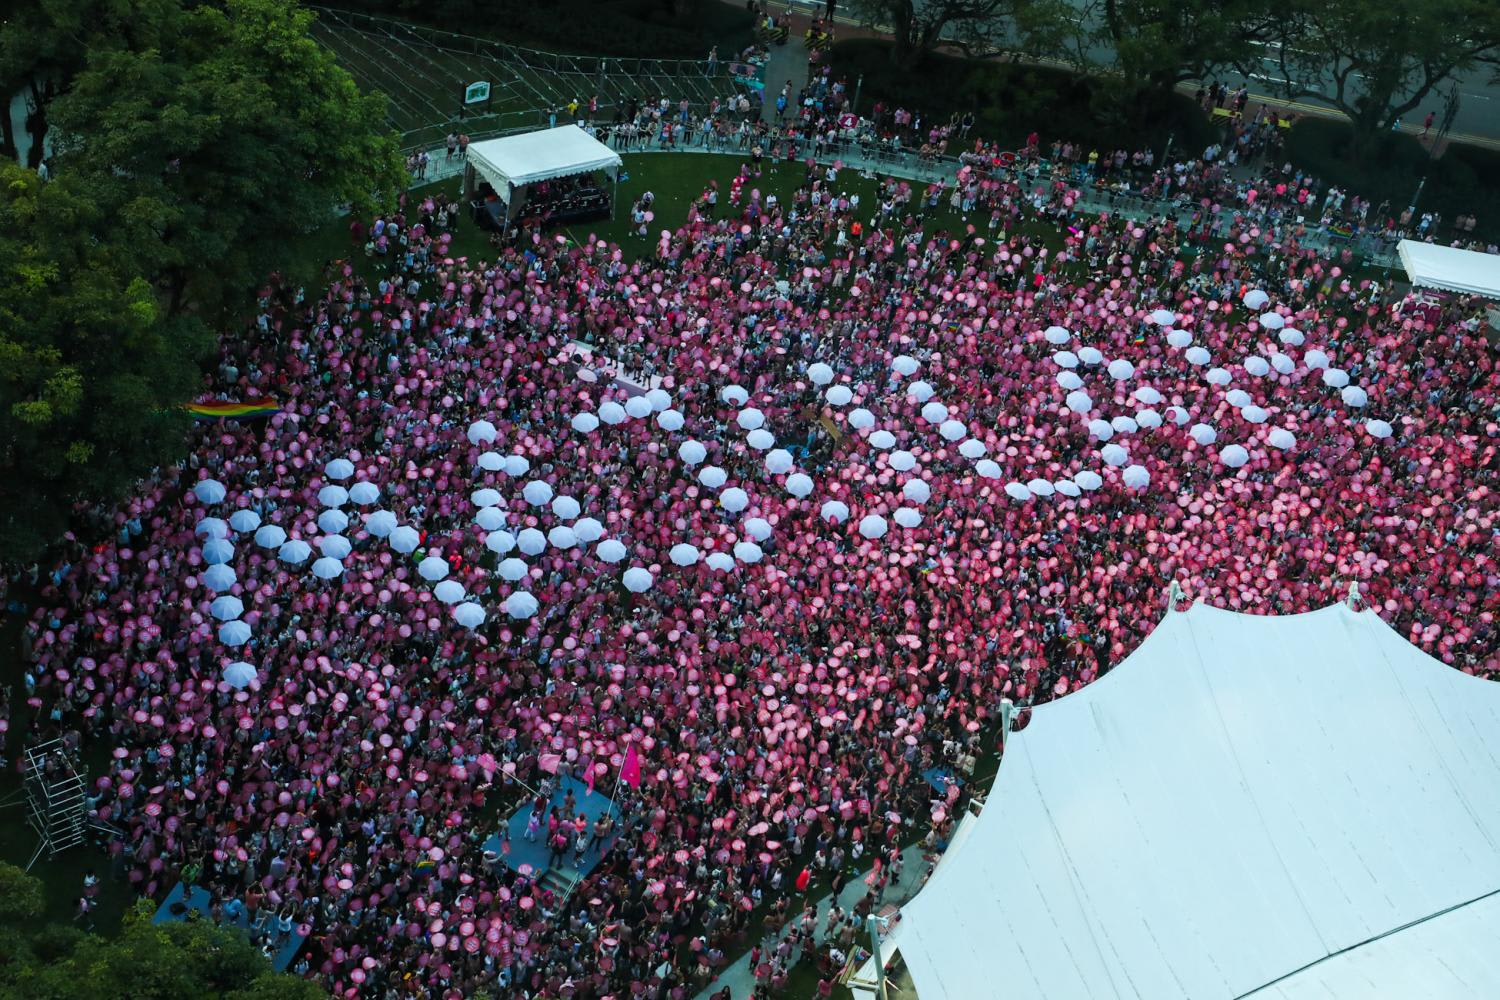  Thousands attend Pink Dot LGBTQ rally, as physical event resumes after 2-year hiatus